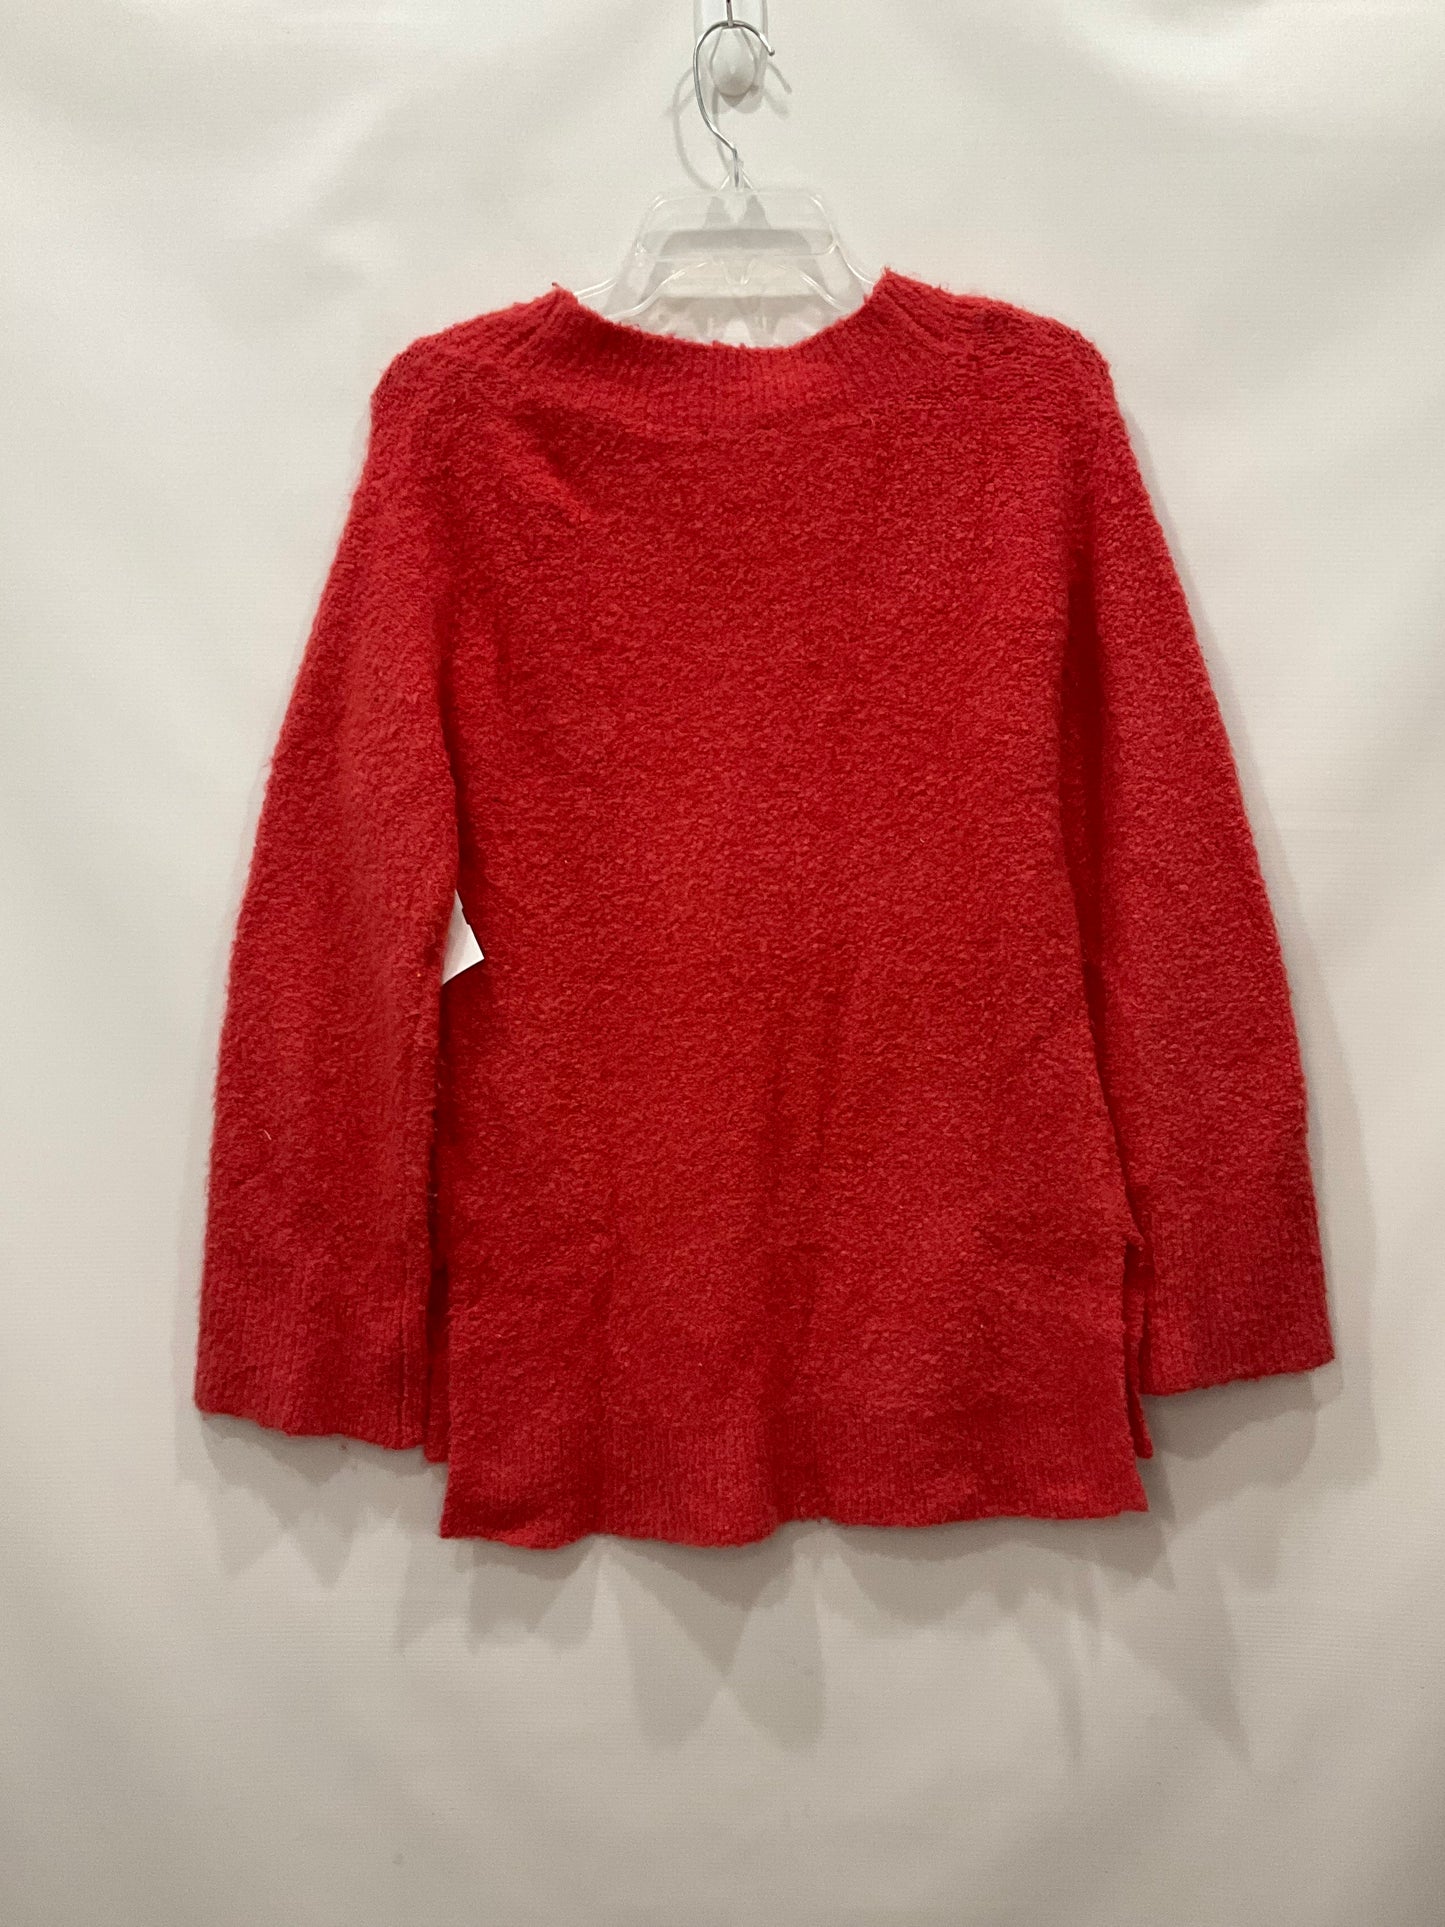 Sweater By Anthropologie  Size: XS